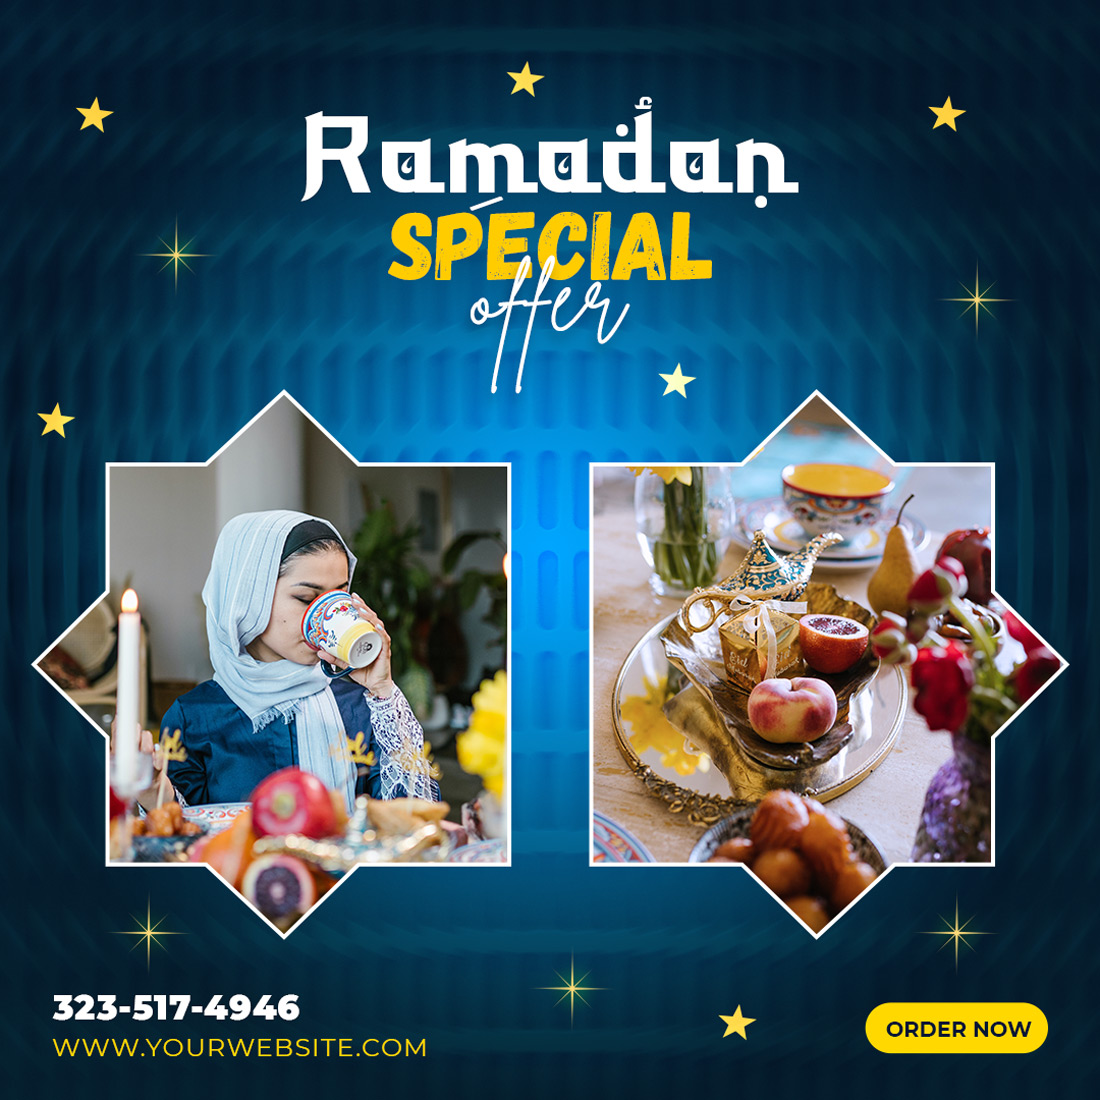 3 Beautiful Ramadan Kareem sale festival religious social media promotion banners- only $3 preview image.